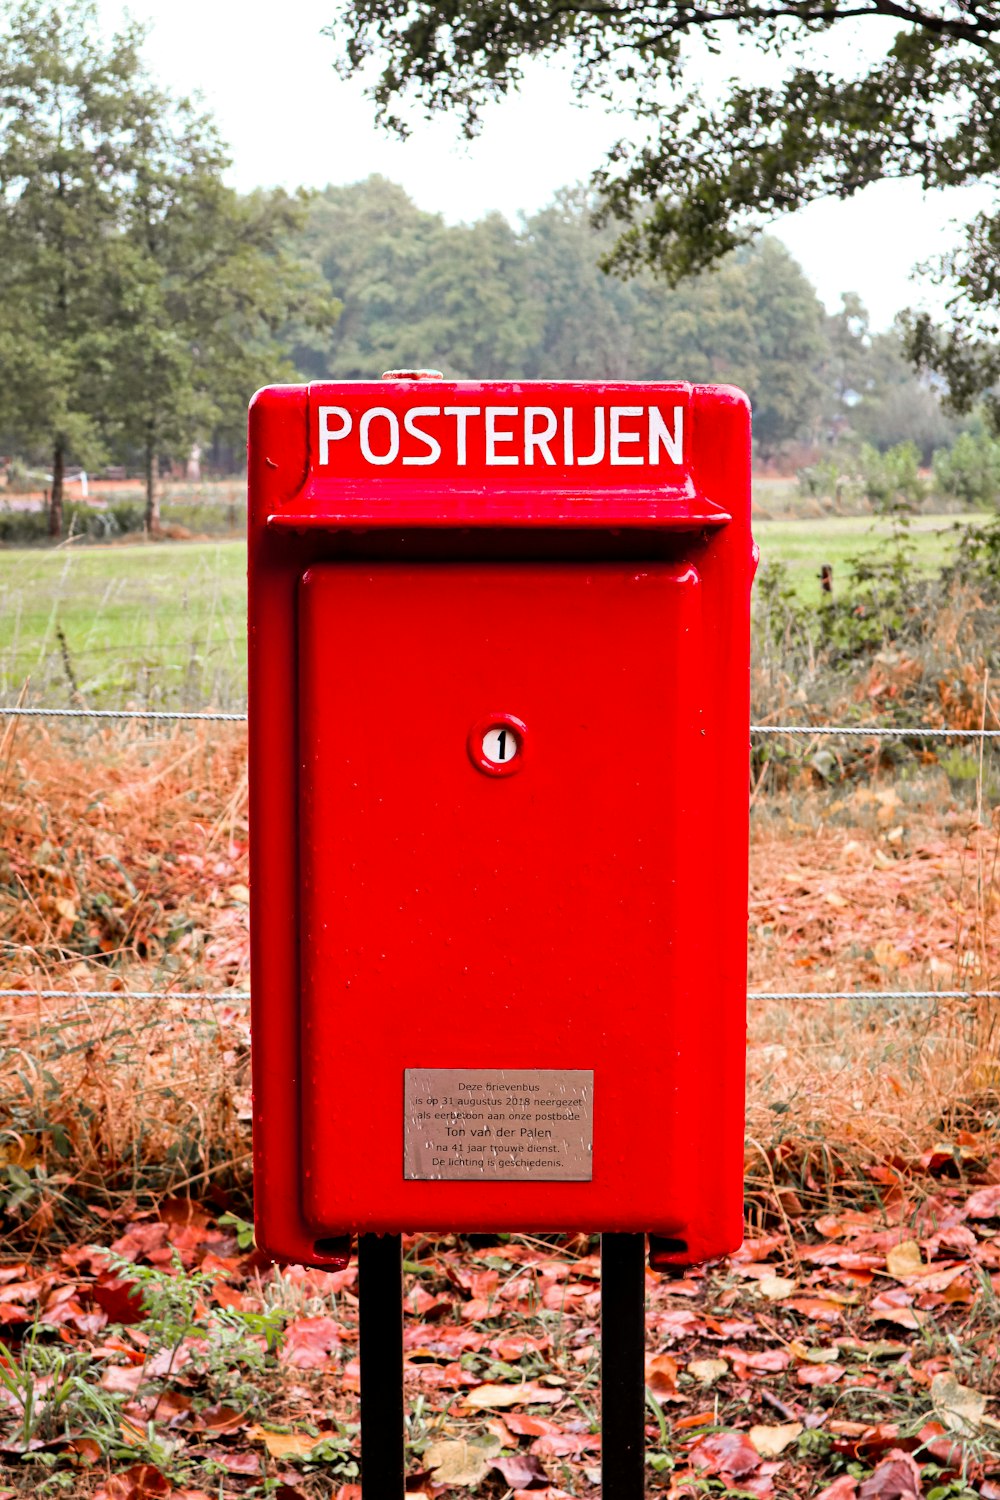 a red mailbox in a park